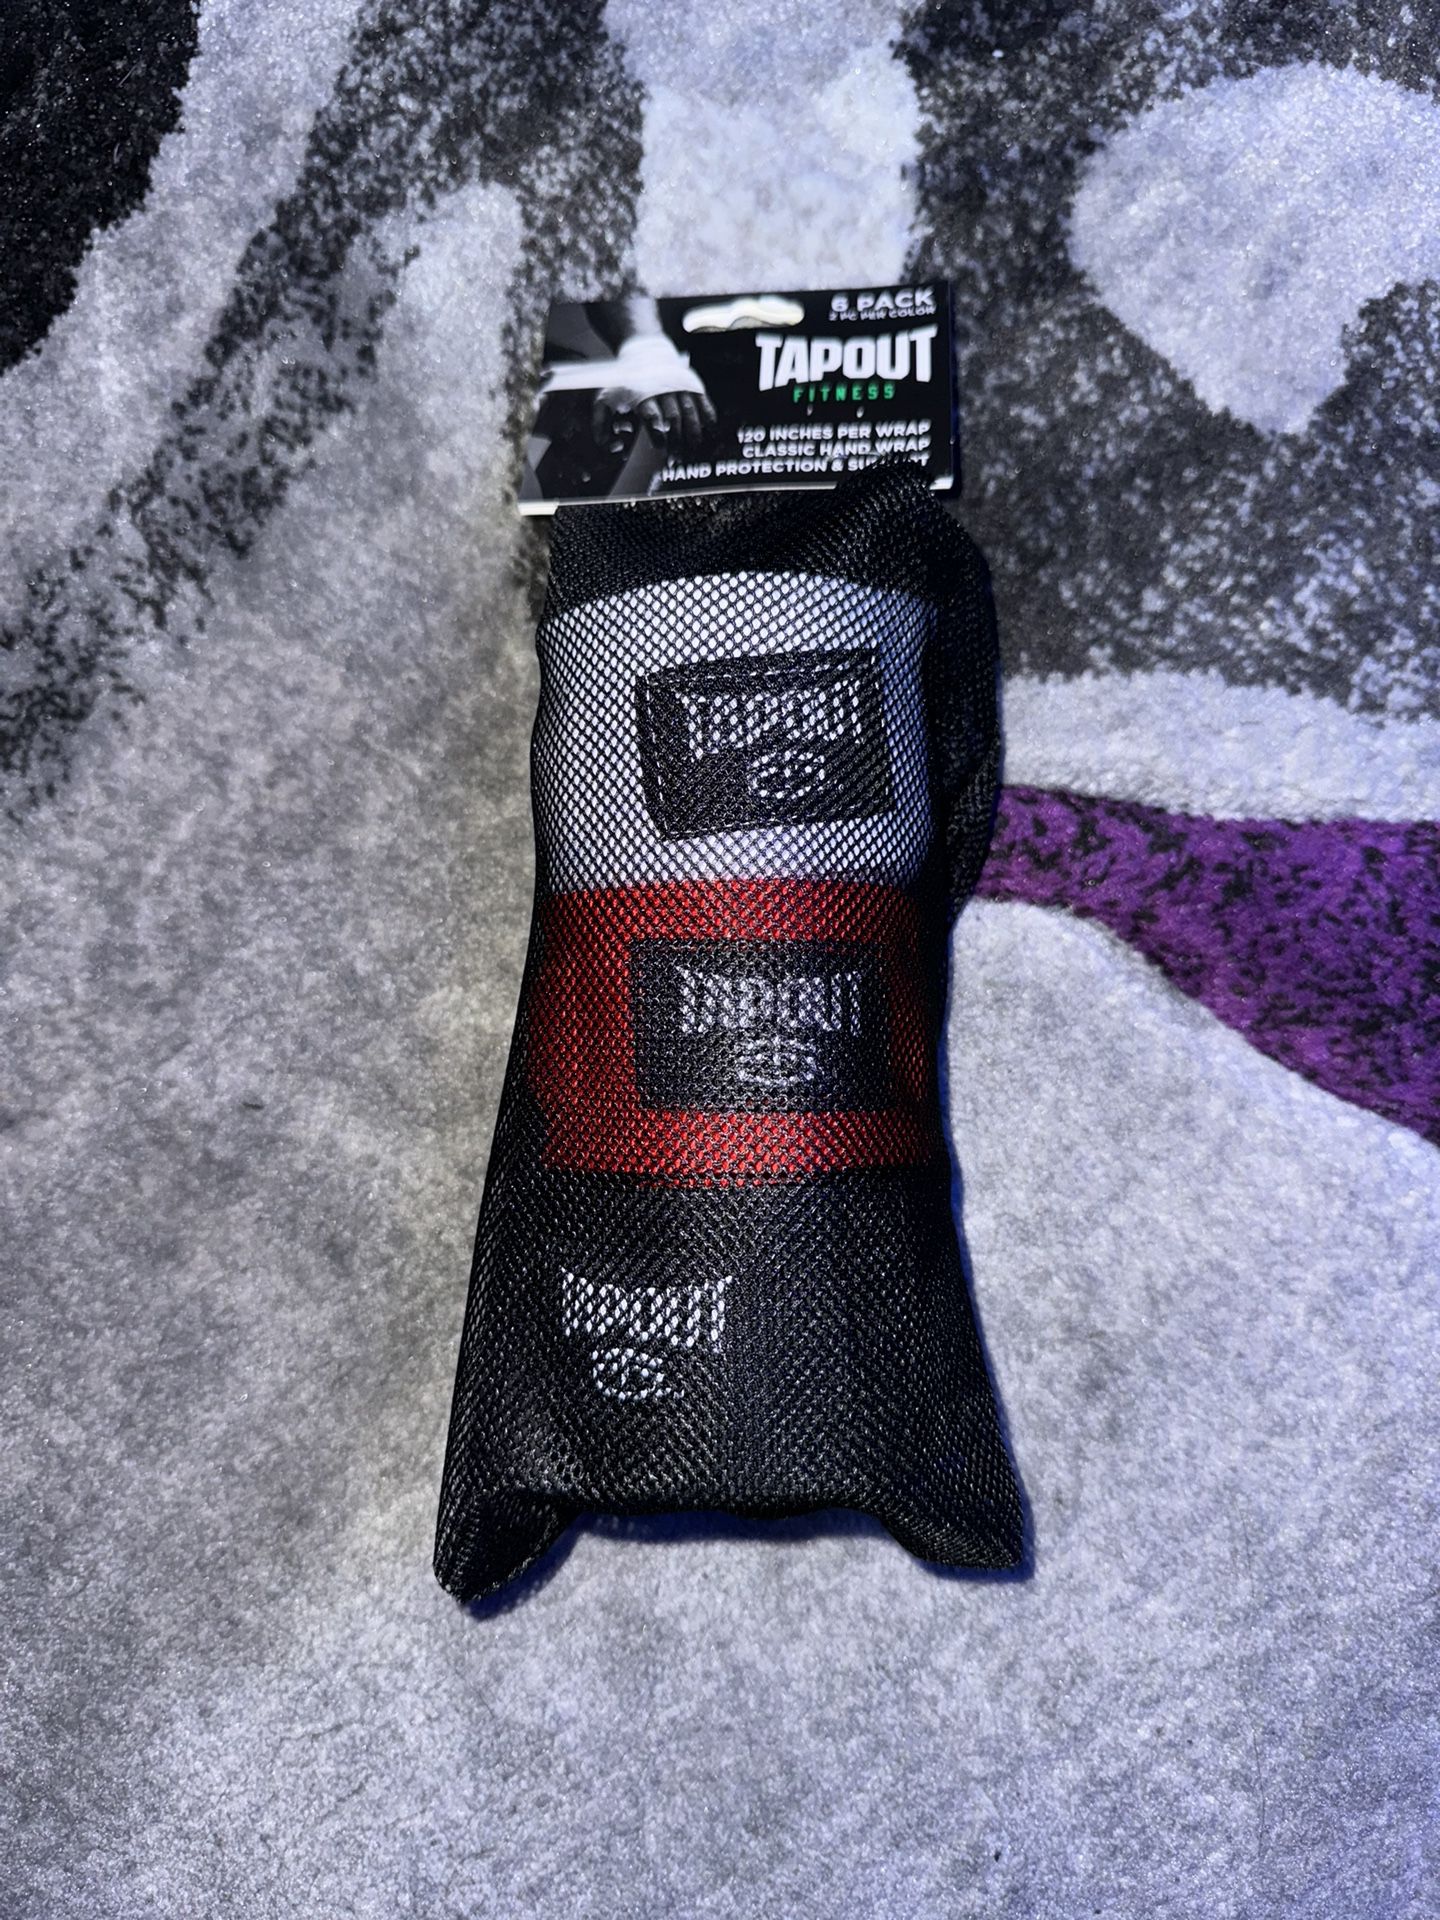 Tapout Boxing / MMA Hand Wraps $20